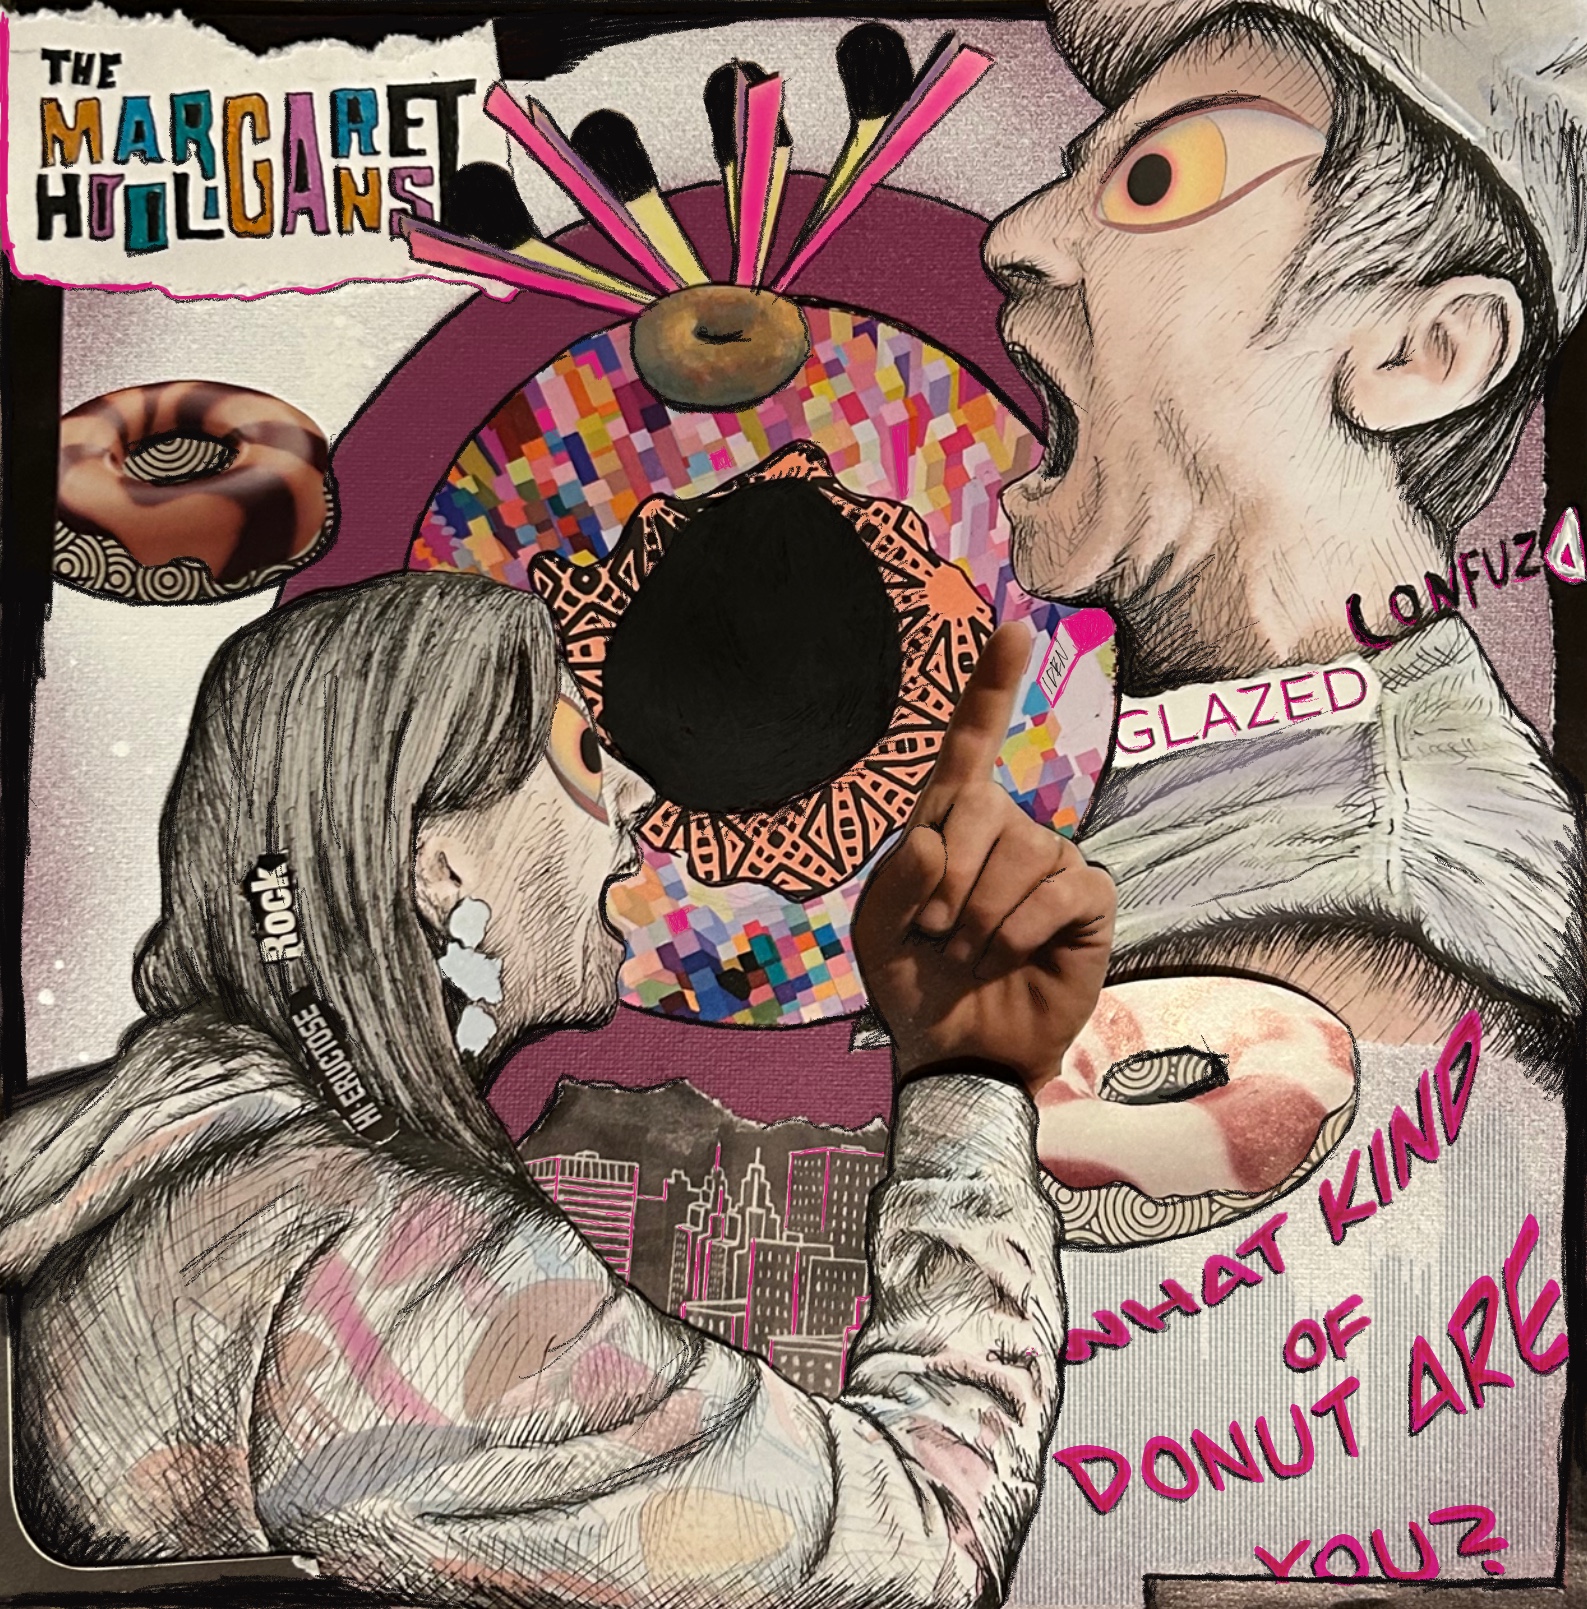 The Margaret Hooligans’ new single “What Kind Of Donut Are You?”